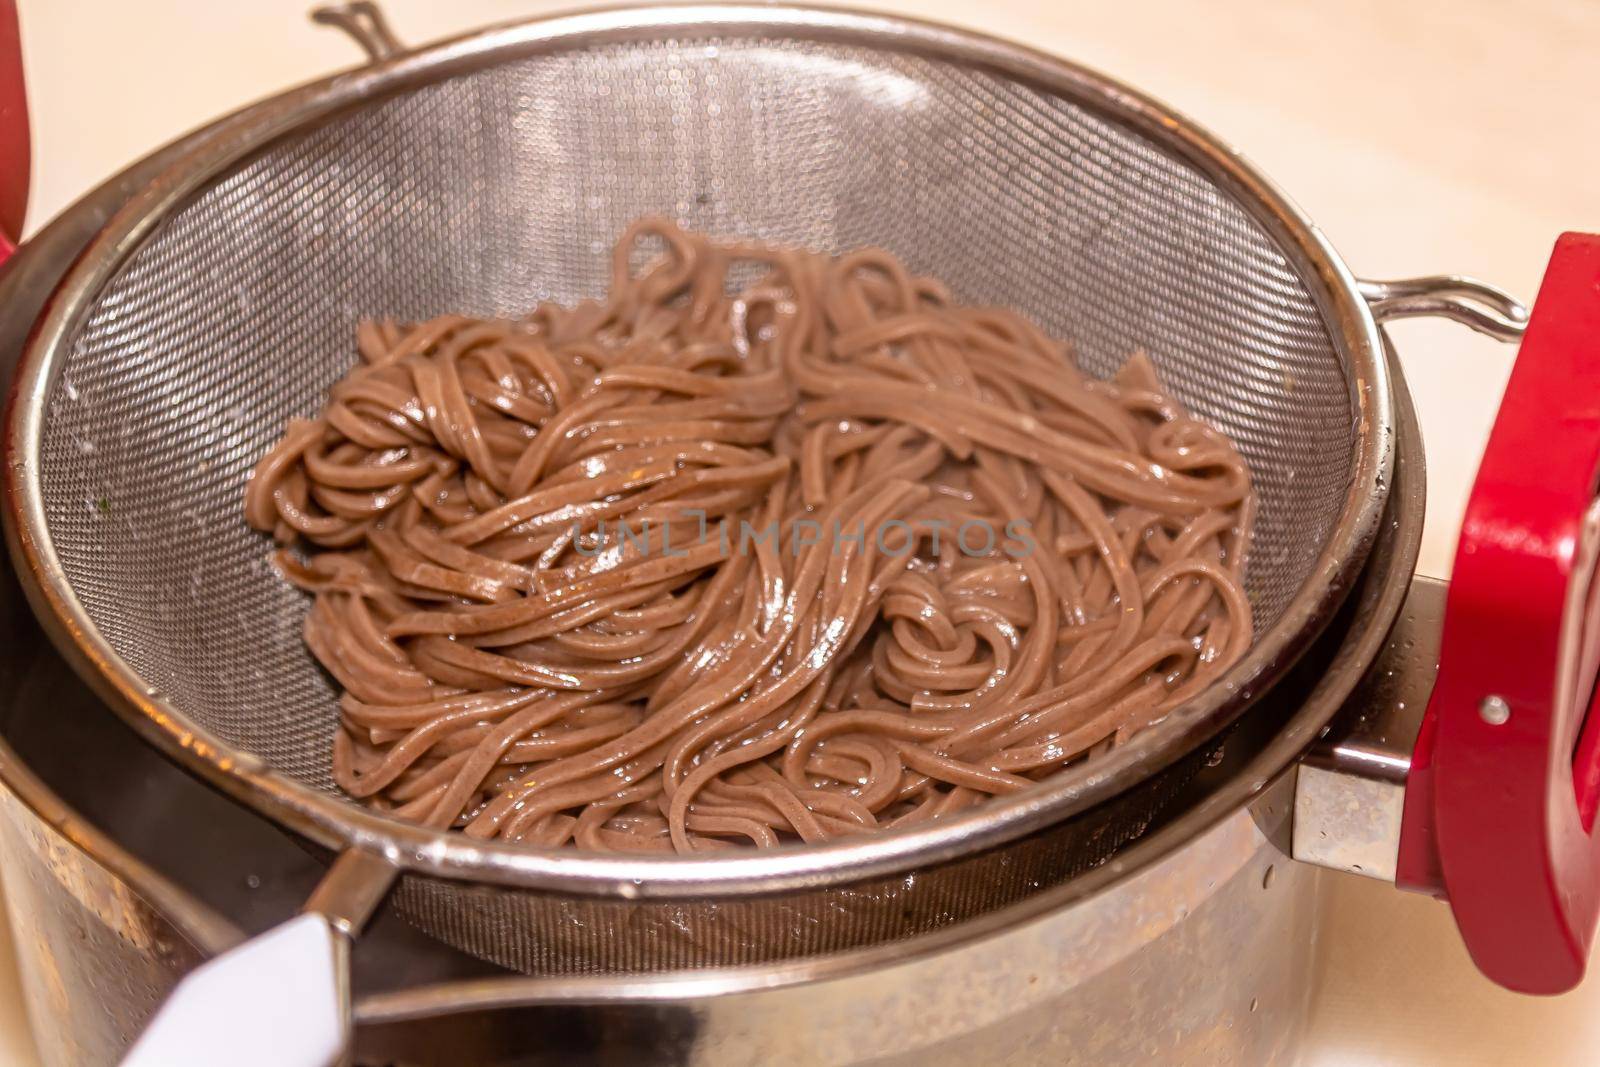 Zaru soba on the table.Buckwheat noodles is a Japanese food culture by Milanchikov